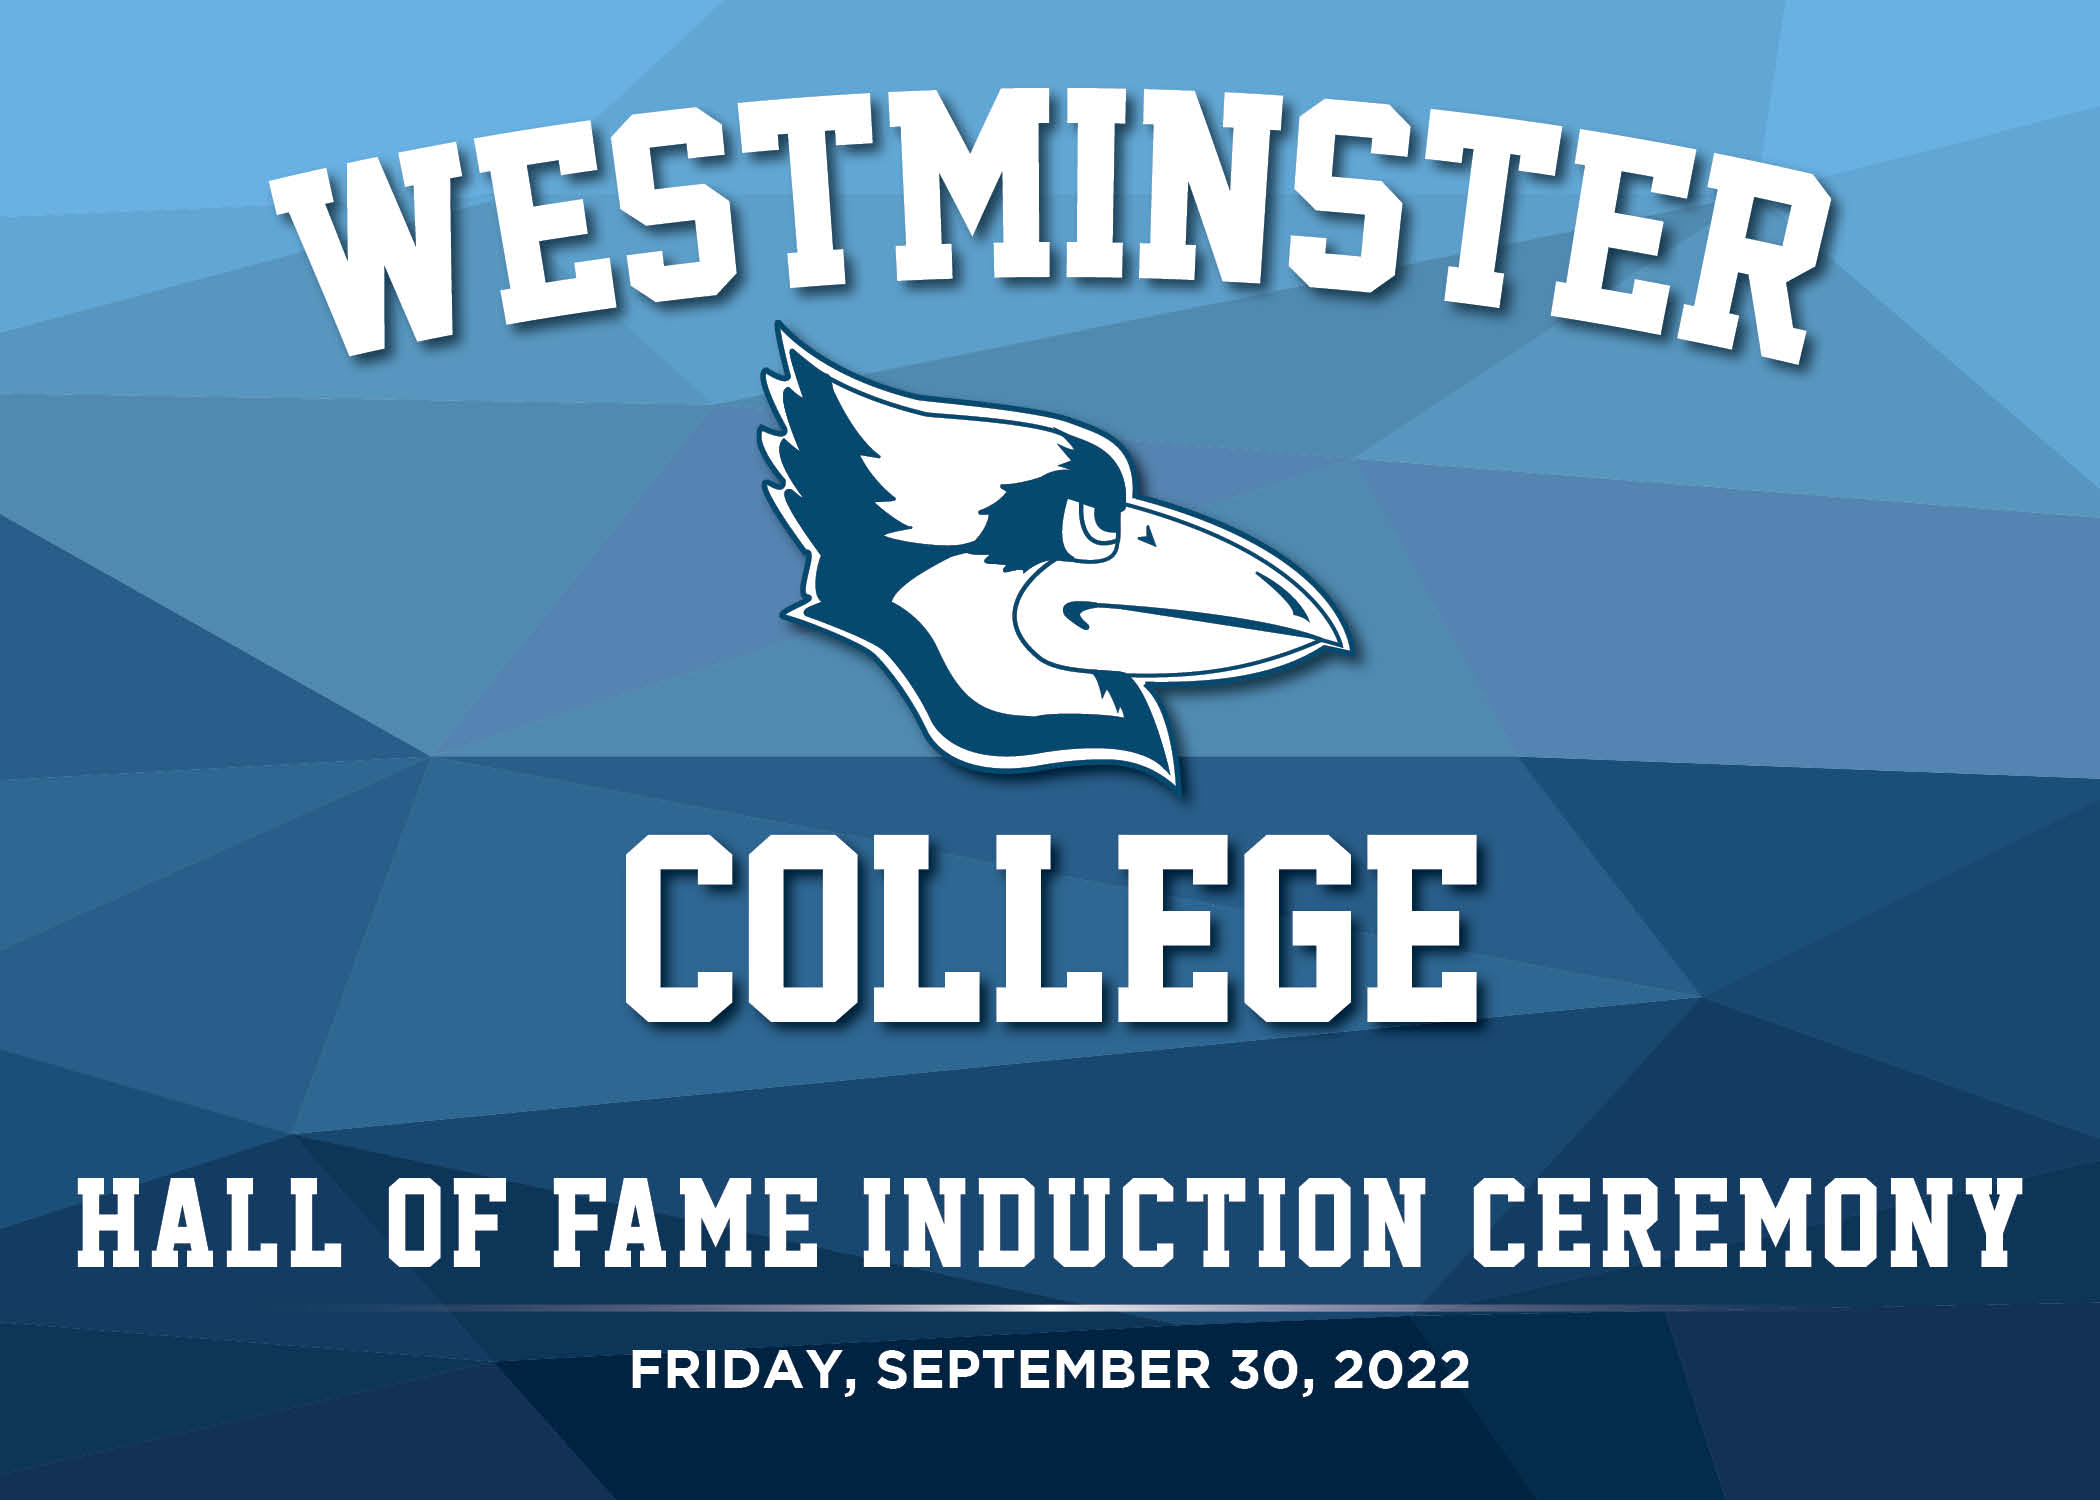 2022 Hall Of Fame Induction Ceremony and Online Auction